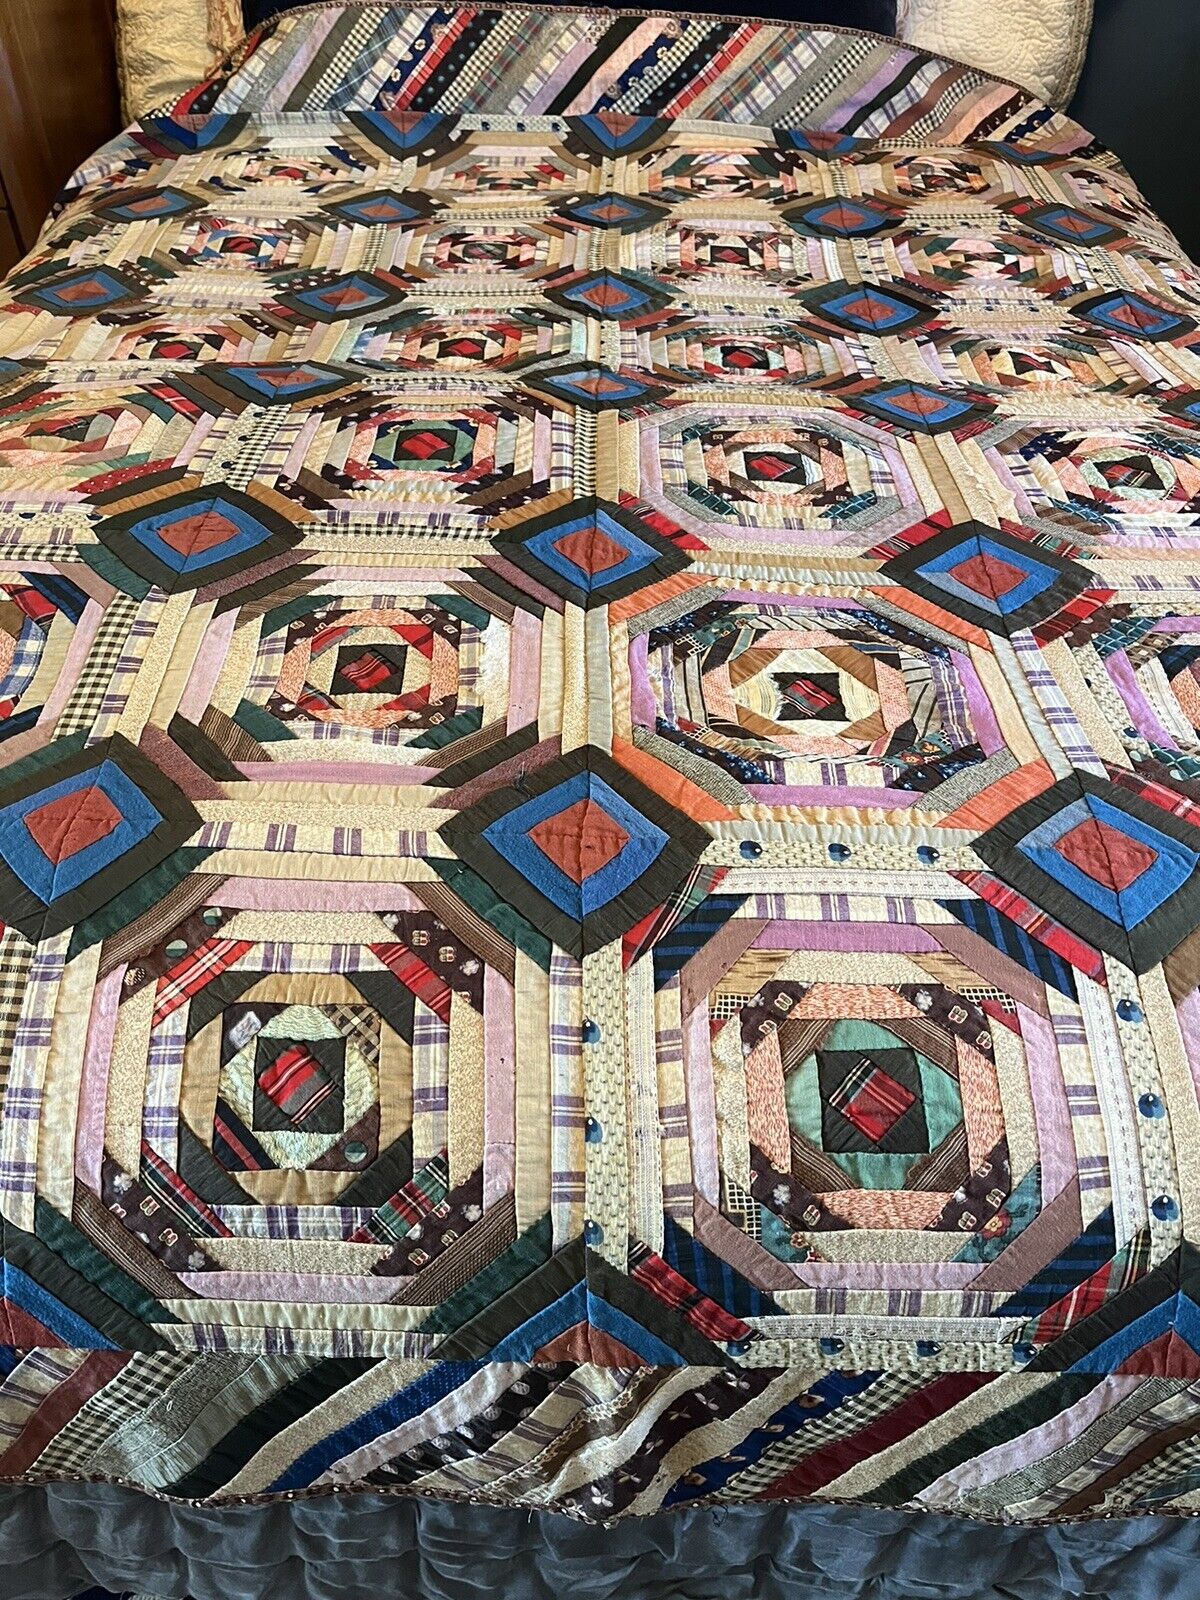 Stunning Antique Handmade Handstitched Pineapple Quilt Late 1800s